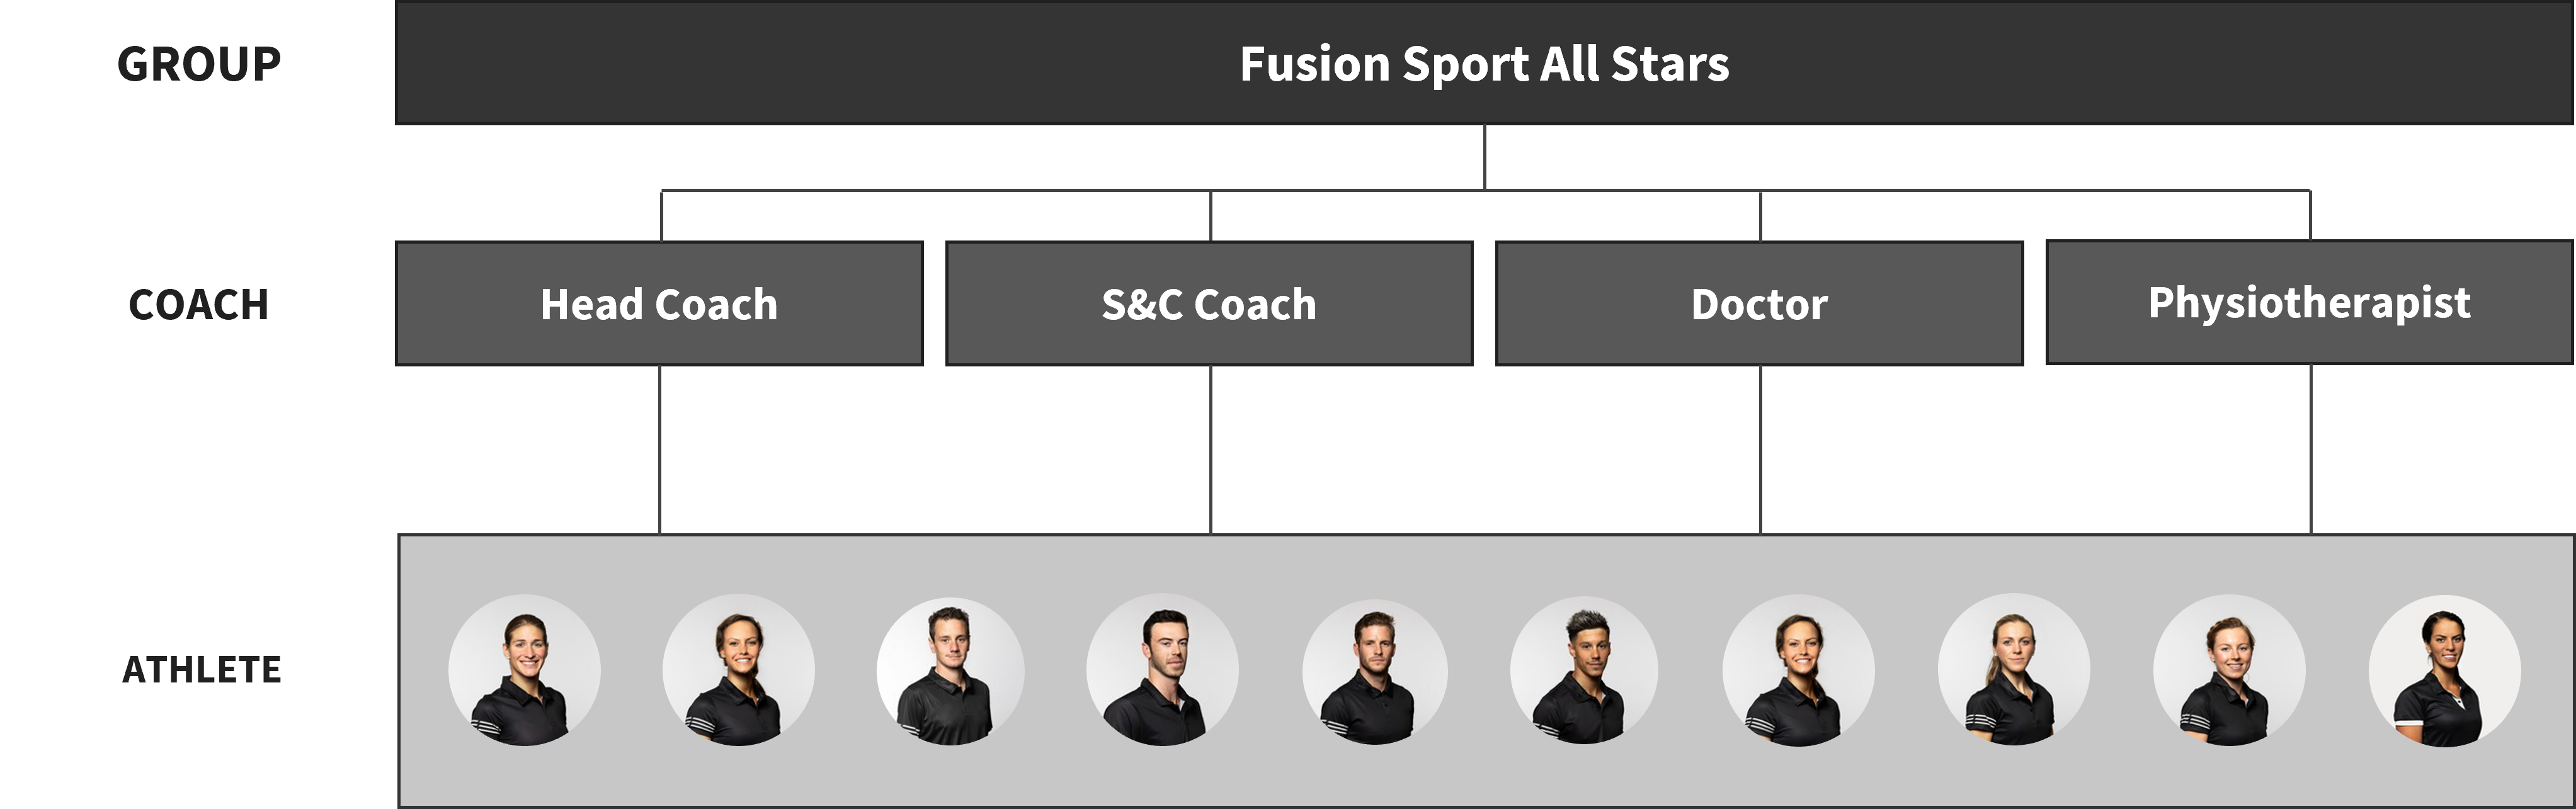 An example of a grouping structure for a fictional team called the Fusion Sport All Stars. The group consists of multiple coaches and athletes.